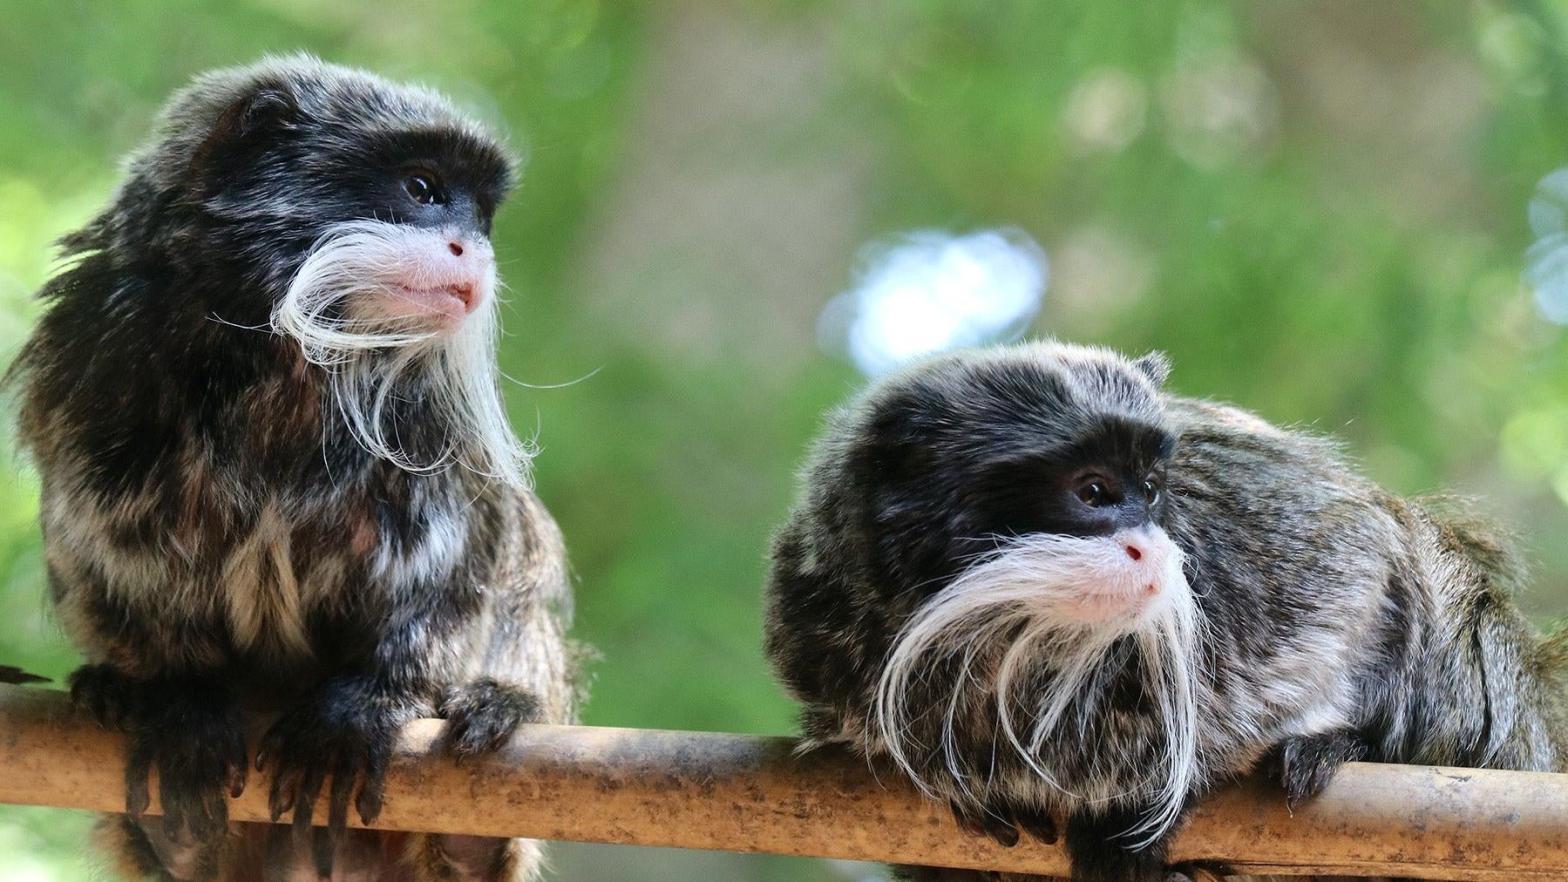 The Dallas Zoo's two emperor tamarin monkeys, Bella and Finn, were found in a closet in Lancaster after being stolen from the facility. (Photo: Courtesy of the Dallas Zoo)